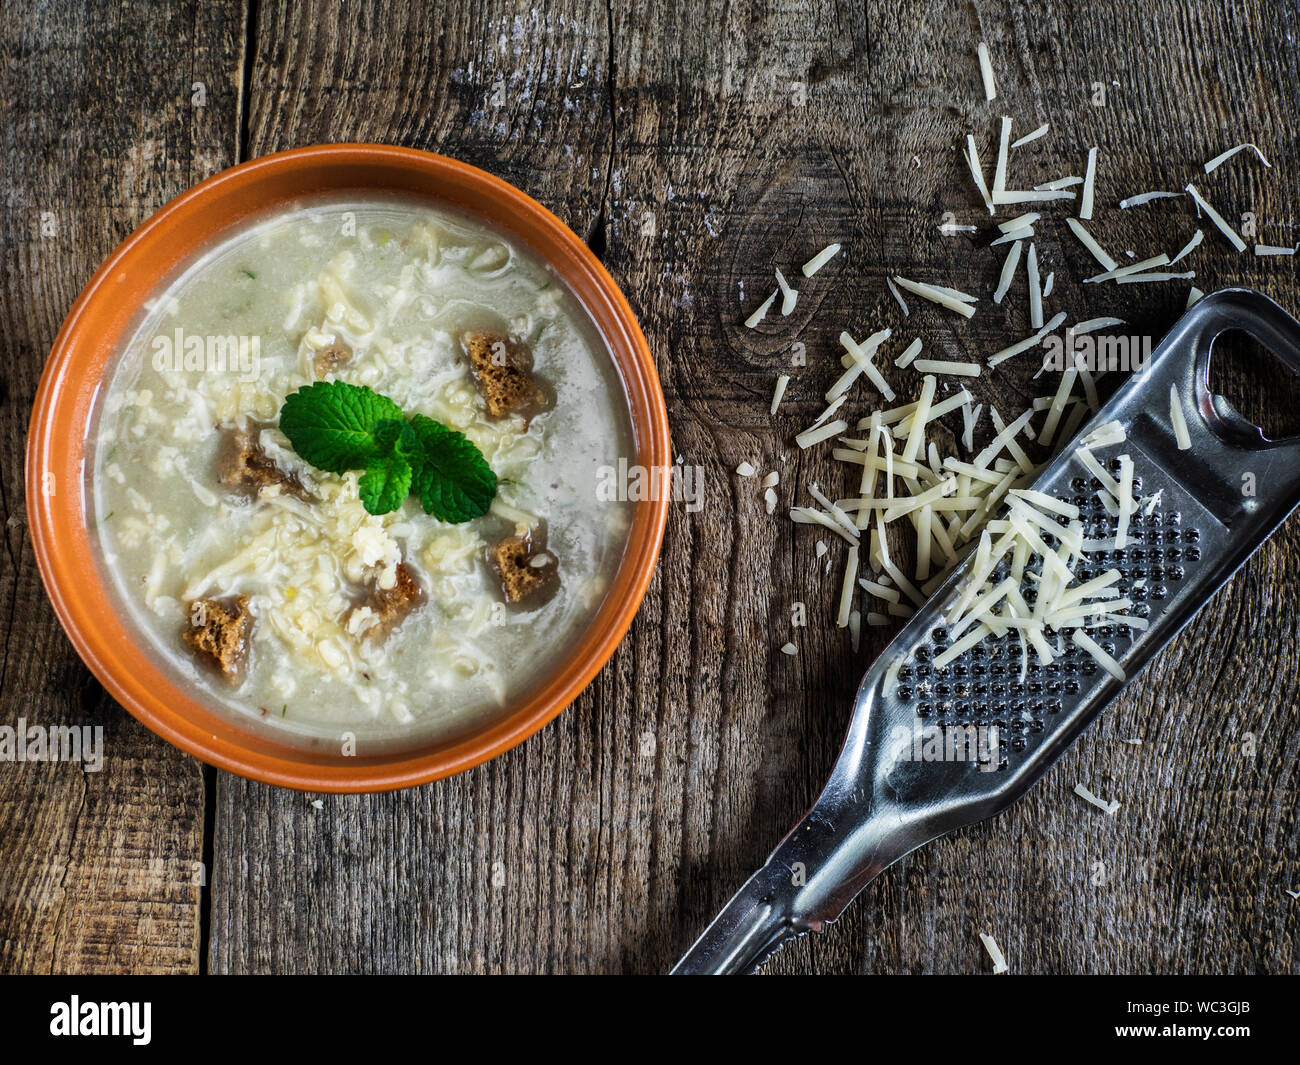 Directly Above Shot Of Vegetable Soup With Croutons And Grated Cheese On Wooden Table Stock Photo